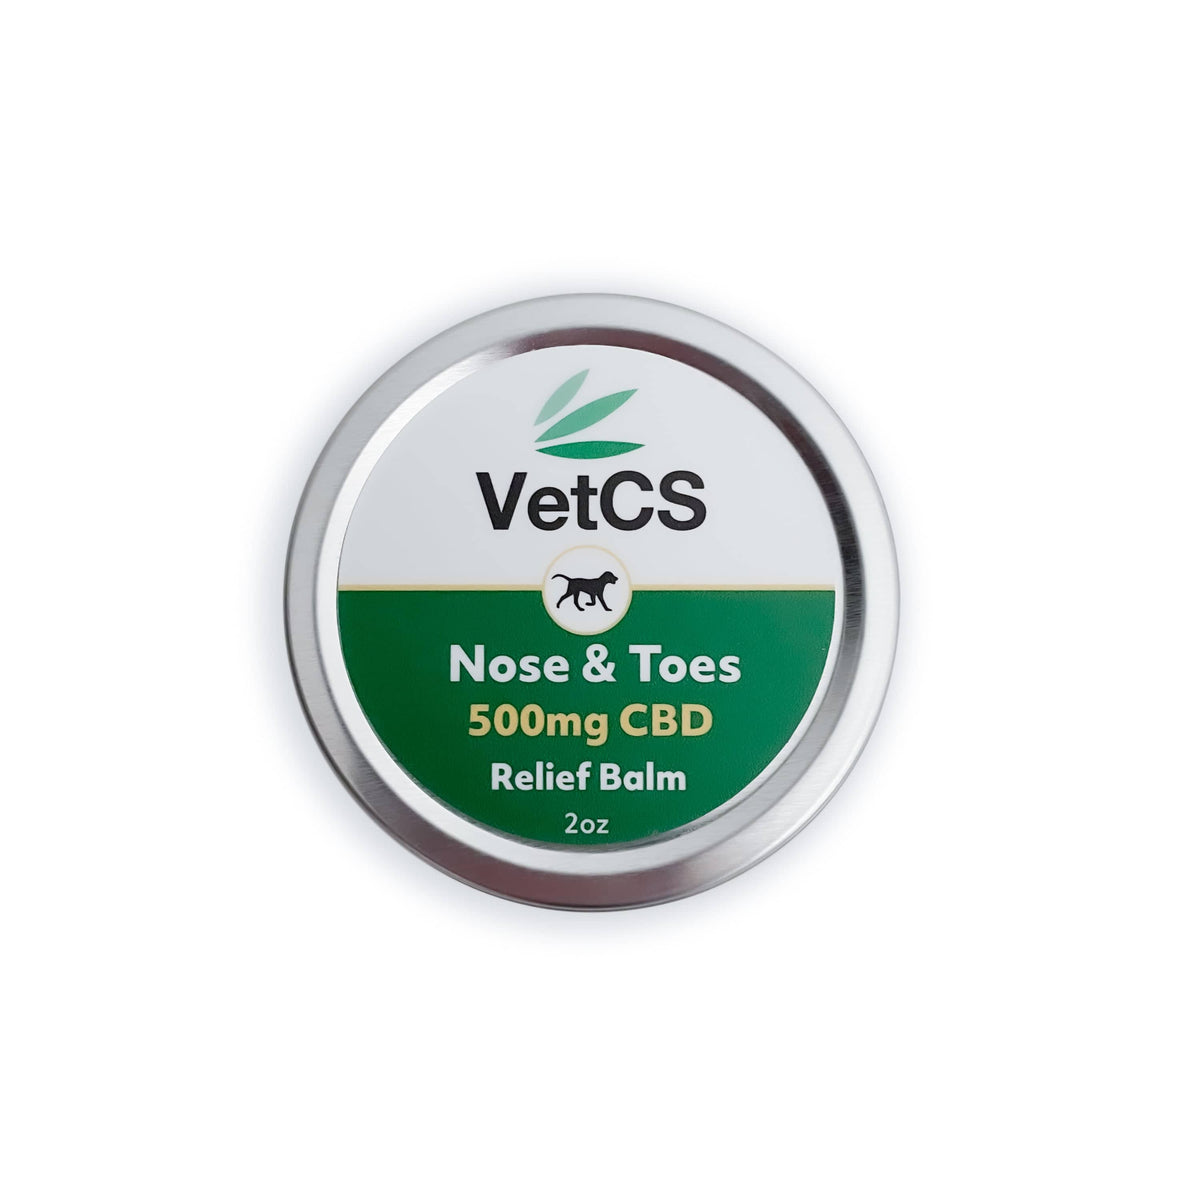 VetCS 2oz CBD Nose and Toes Palm for Dogs